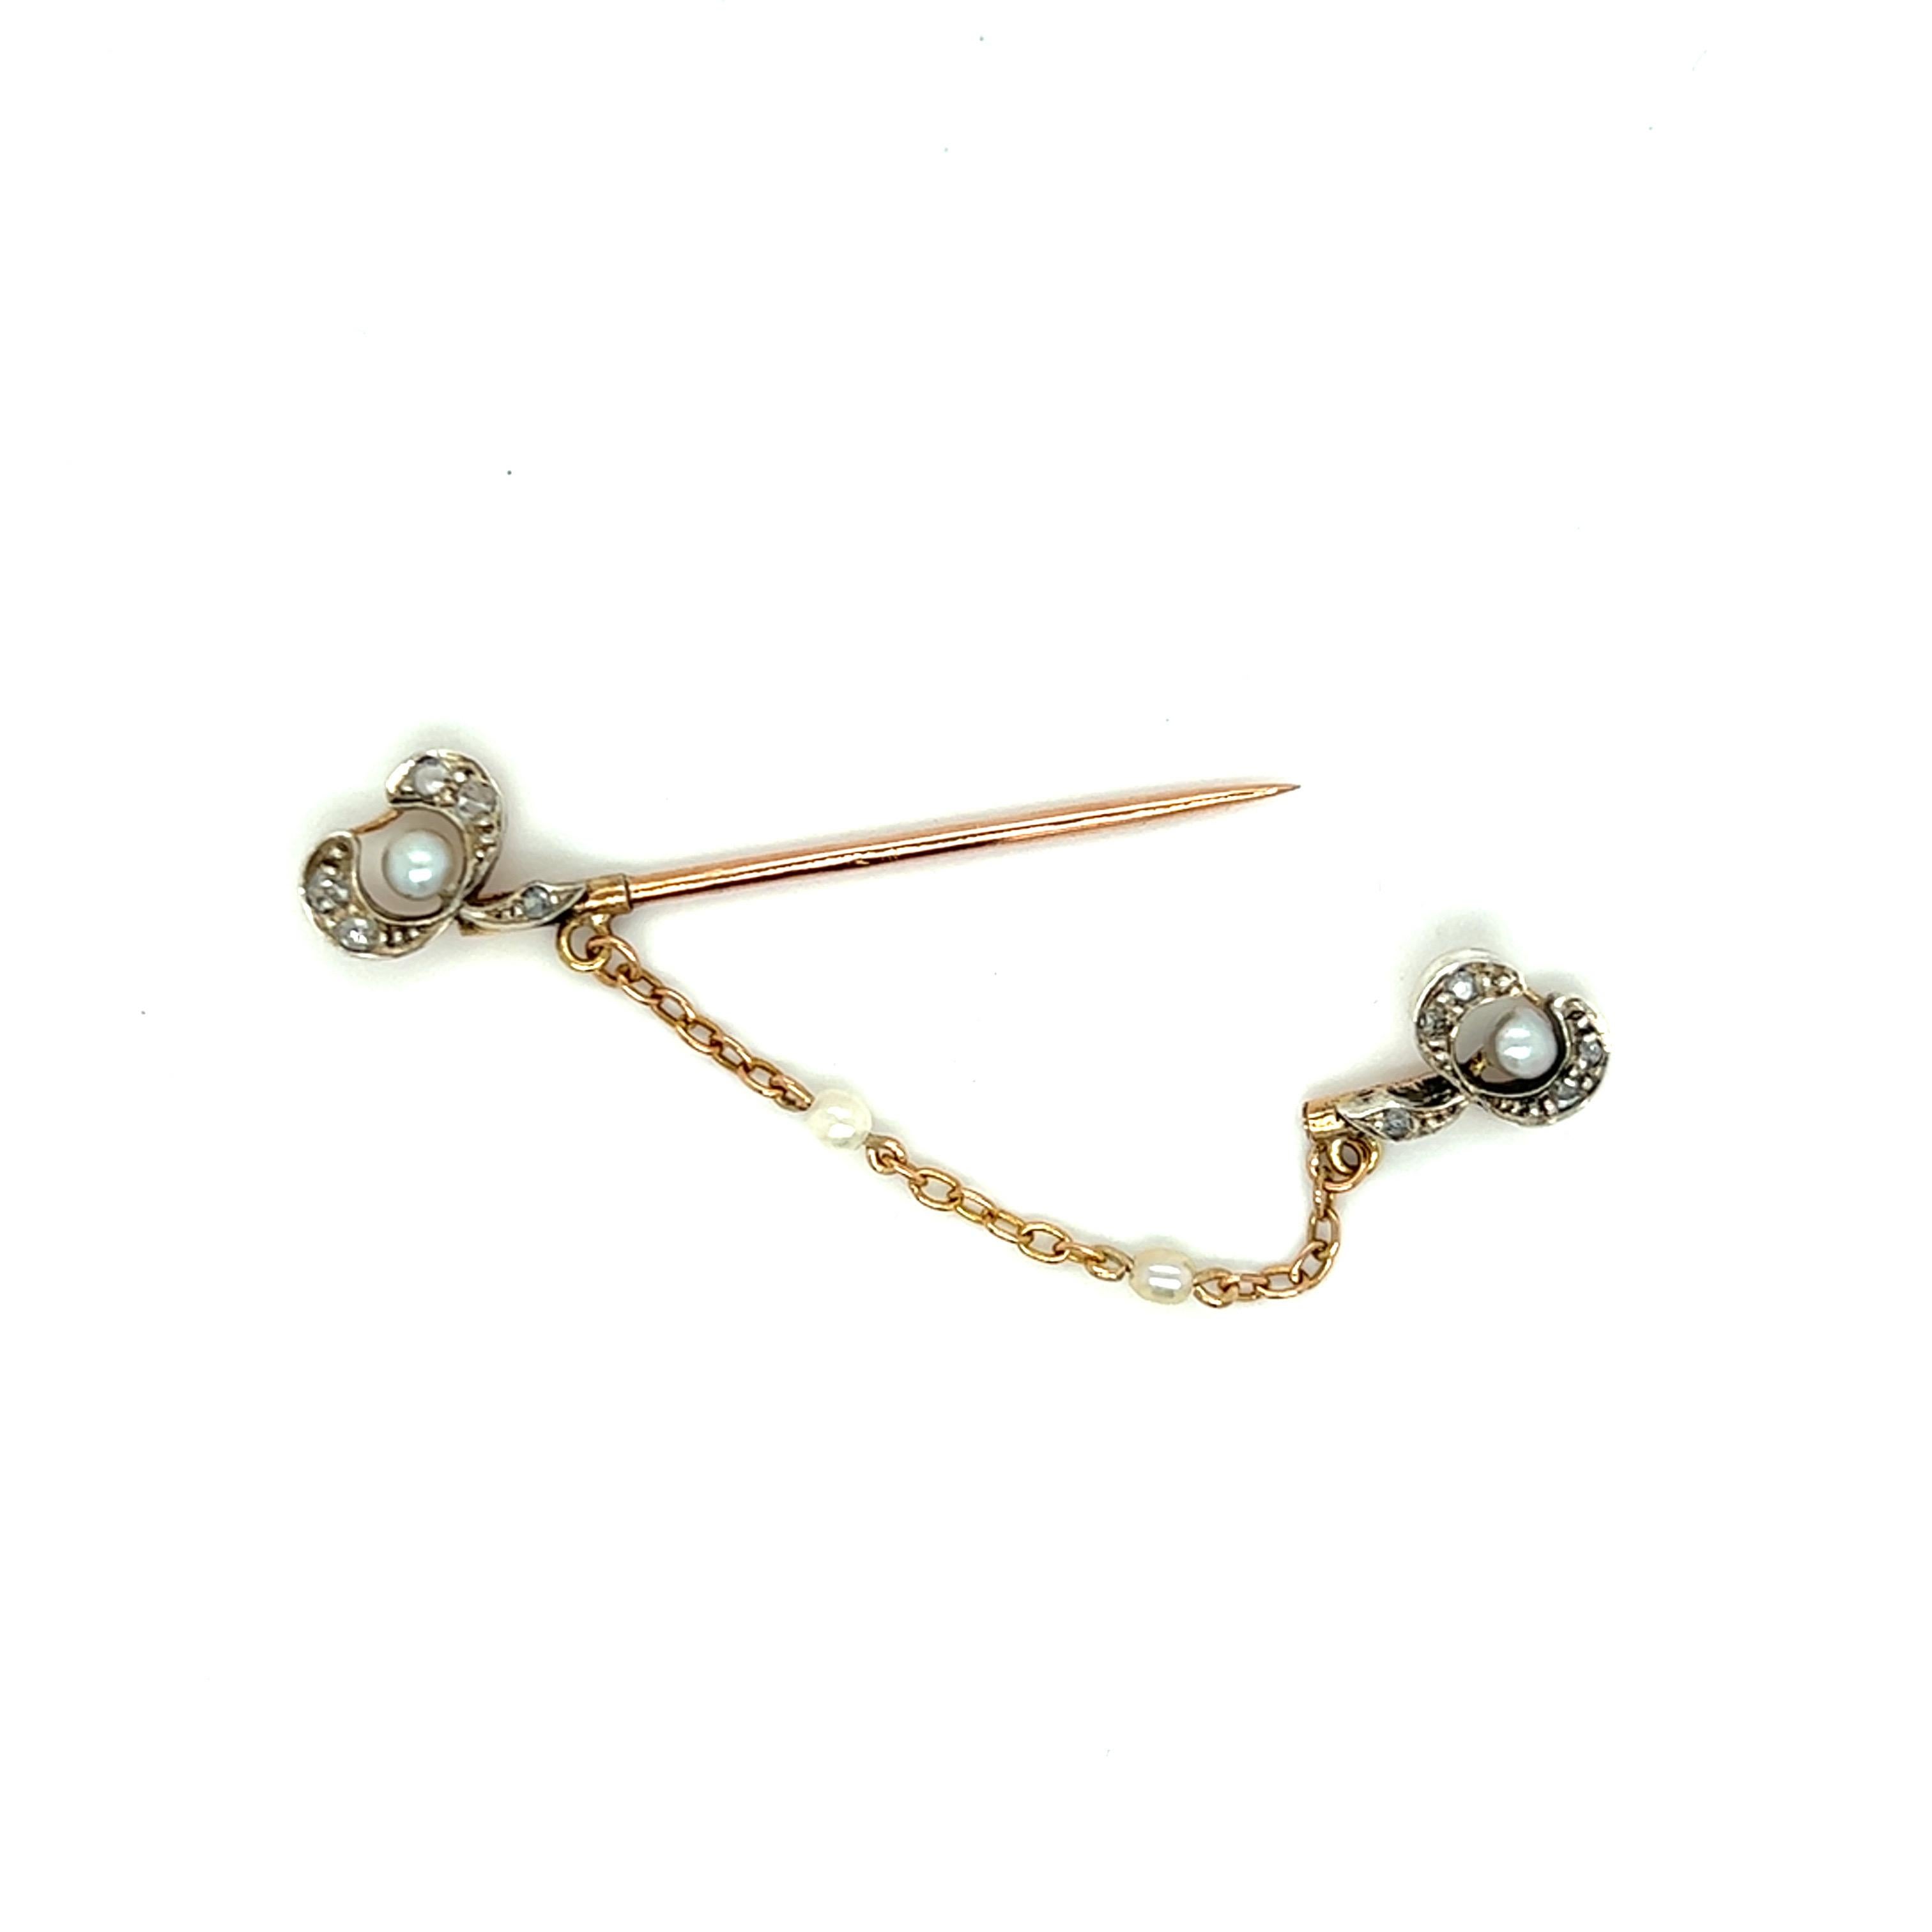 The Estate Antique Seed Pearl and Diamond Pin is from the Edwardian era and is crafted from sterling silver and 9 karat yellow gold. It features 4 seed pearls and 10 rose-cut diamonds weighing 0.10 carat total weight. The pin measures approximately